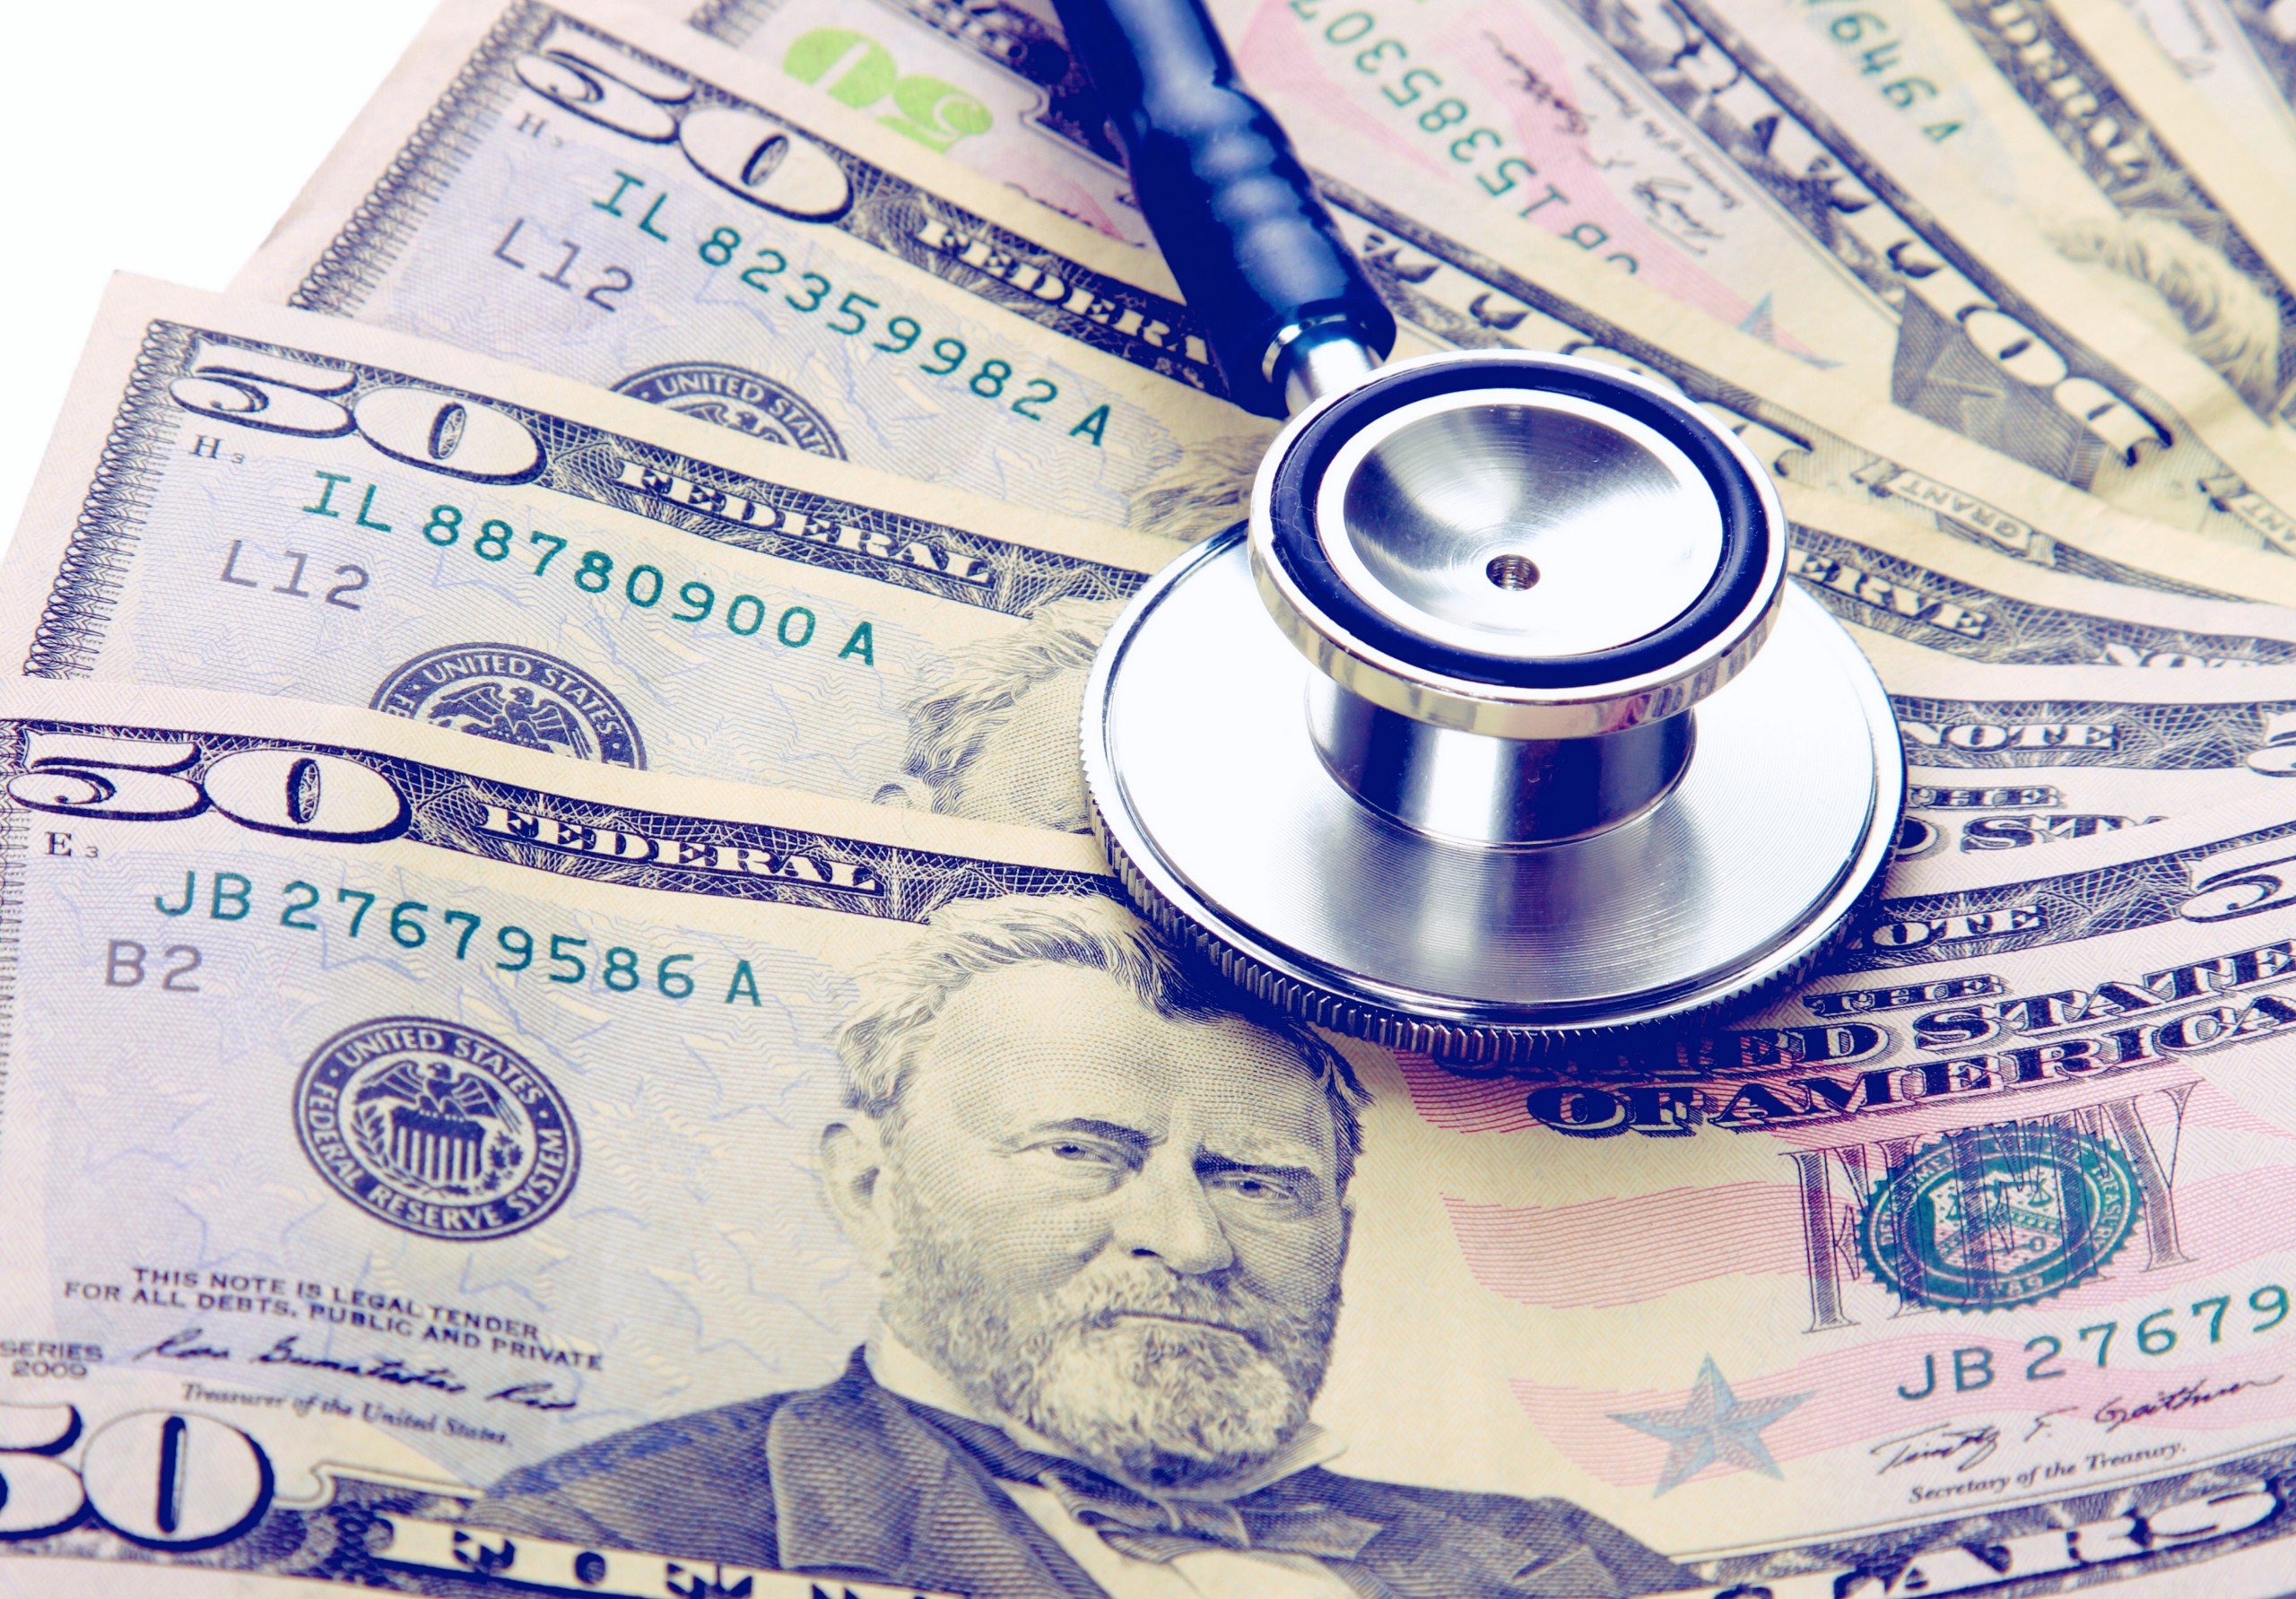 Medicare costs jump for those with higher income